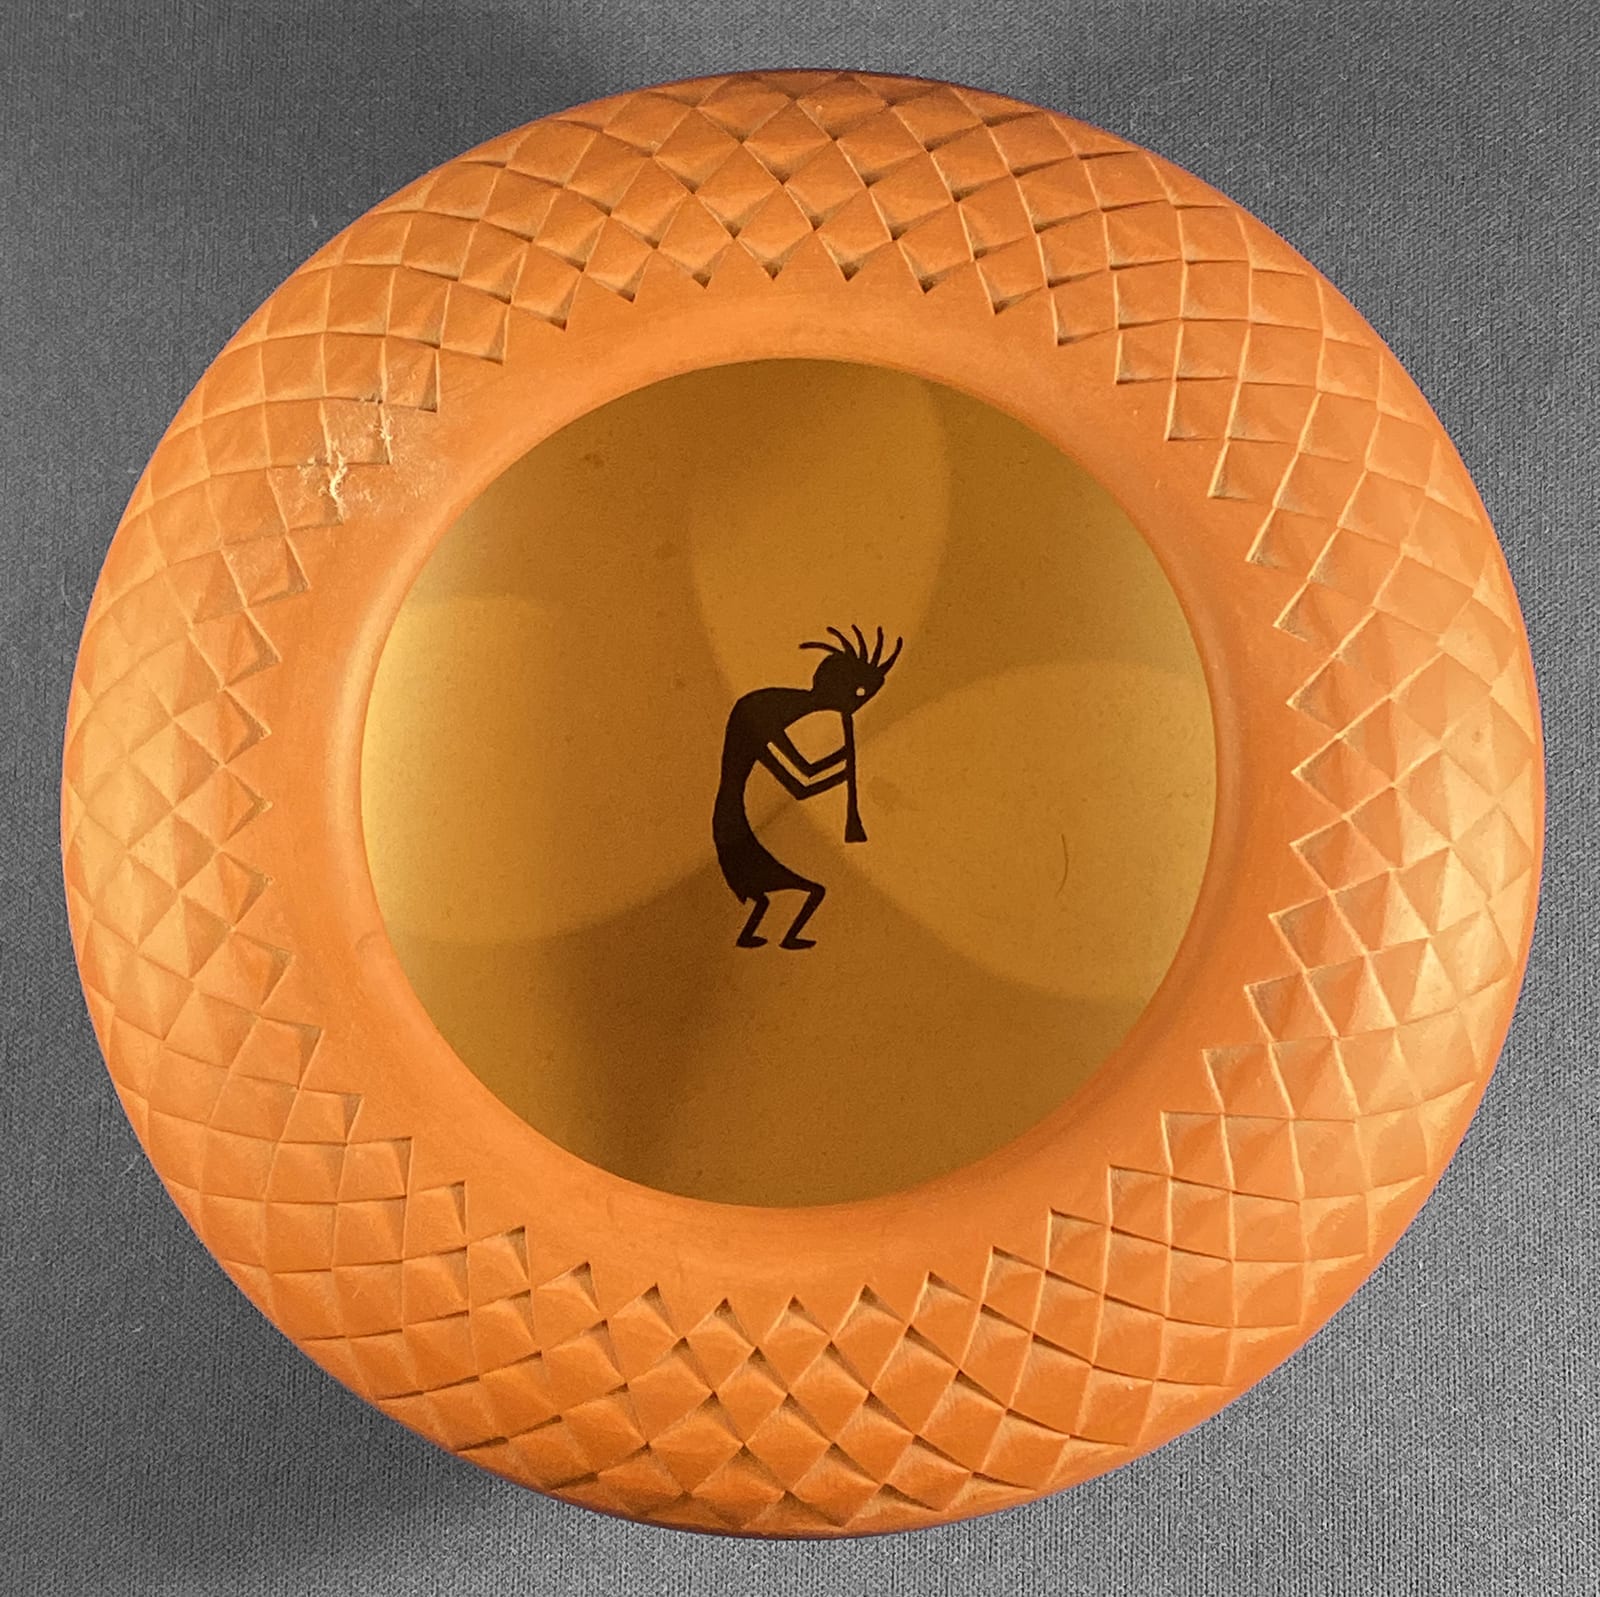 2019-14  Redware bowl with patterned rim